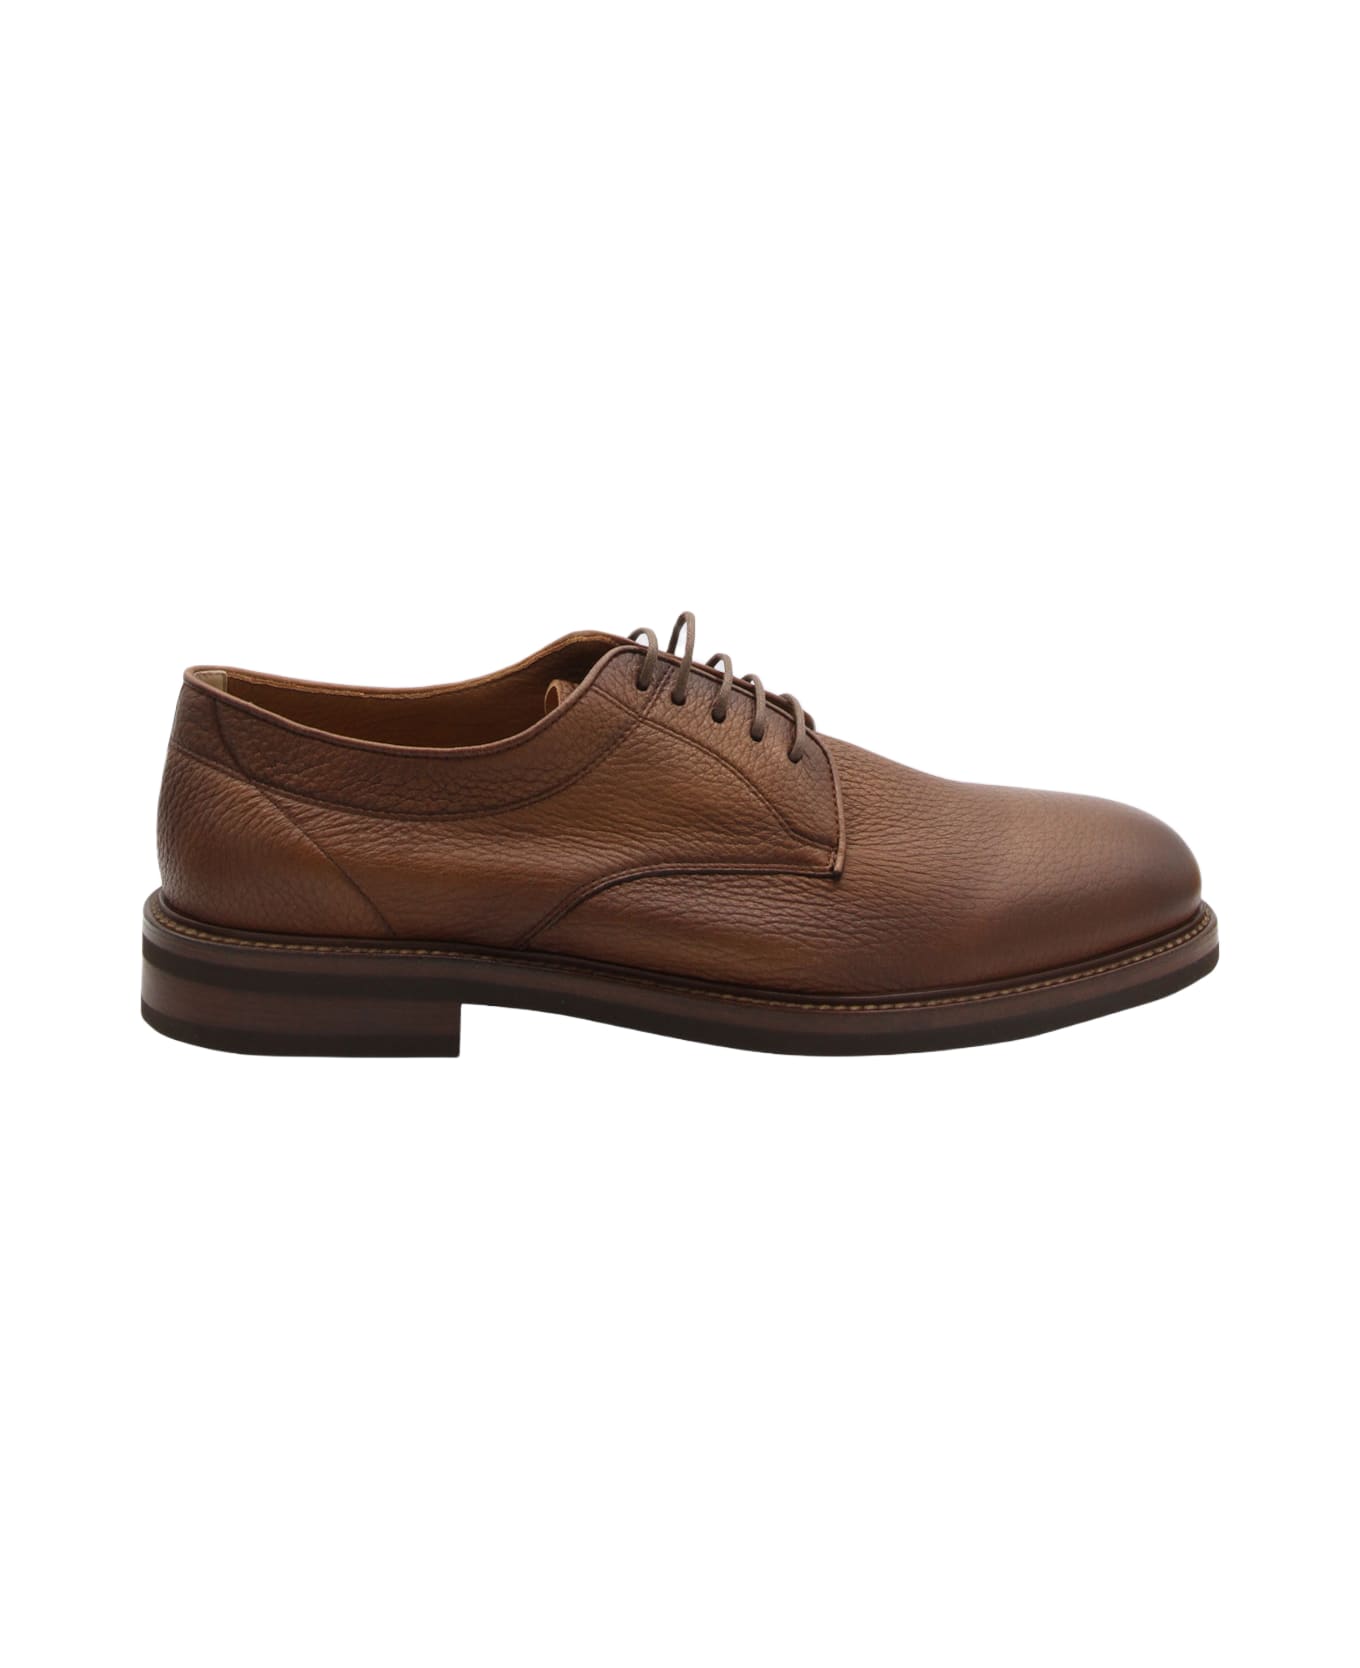 Brunello Cucinelli Cognac Leather Lace Up Shoes - Brandy ローファー＆デッキシューズ